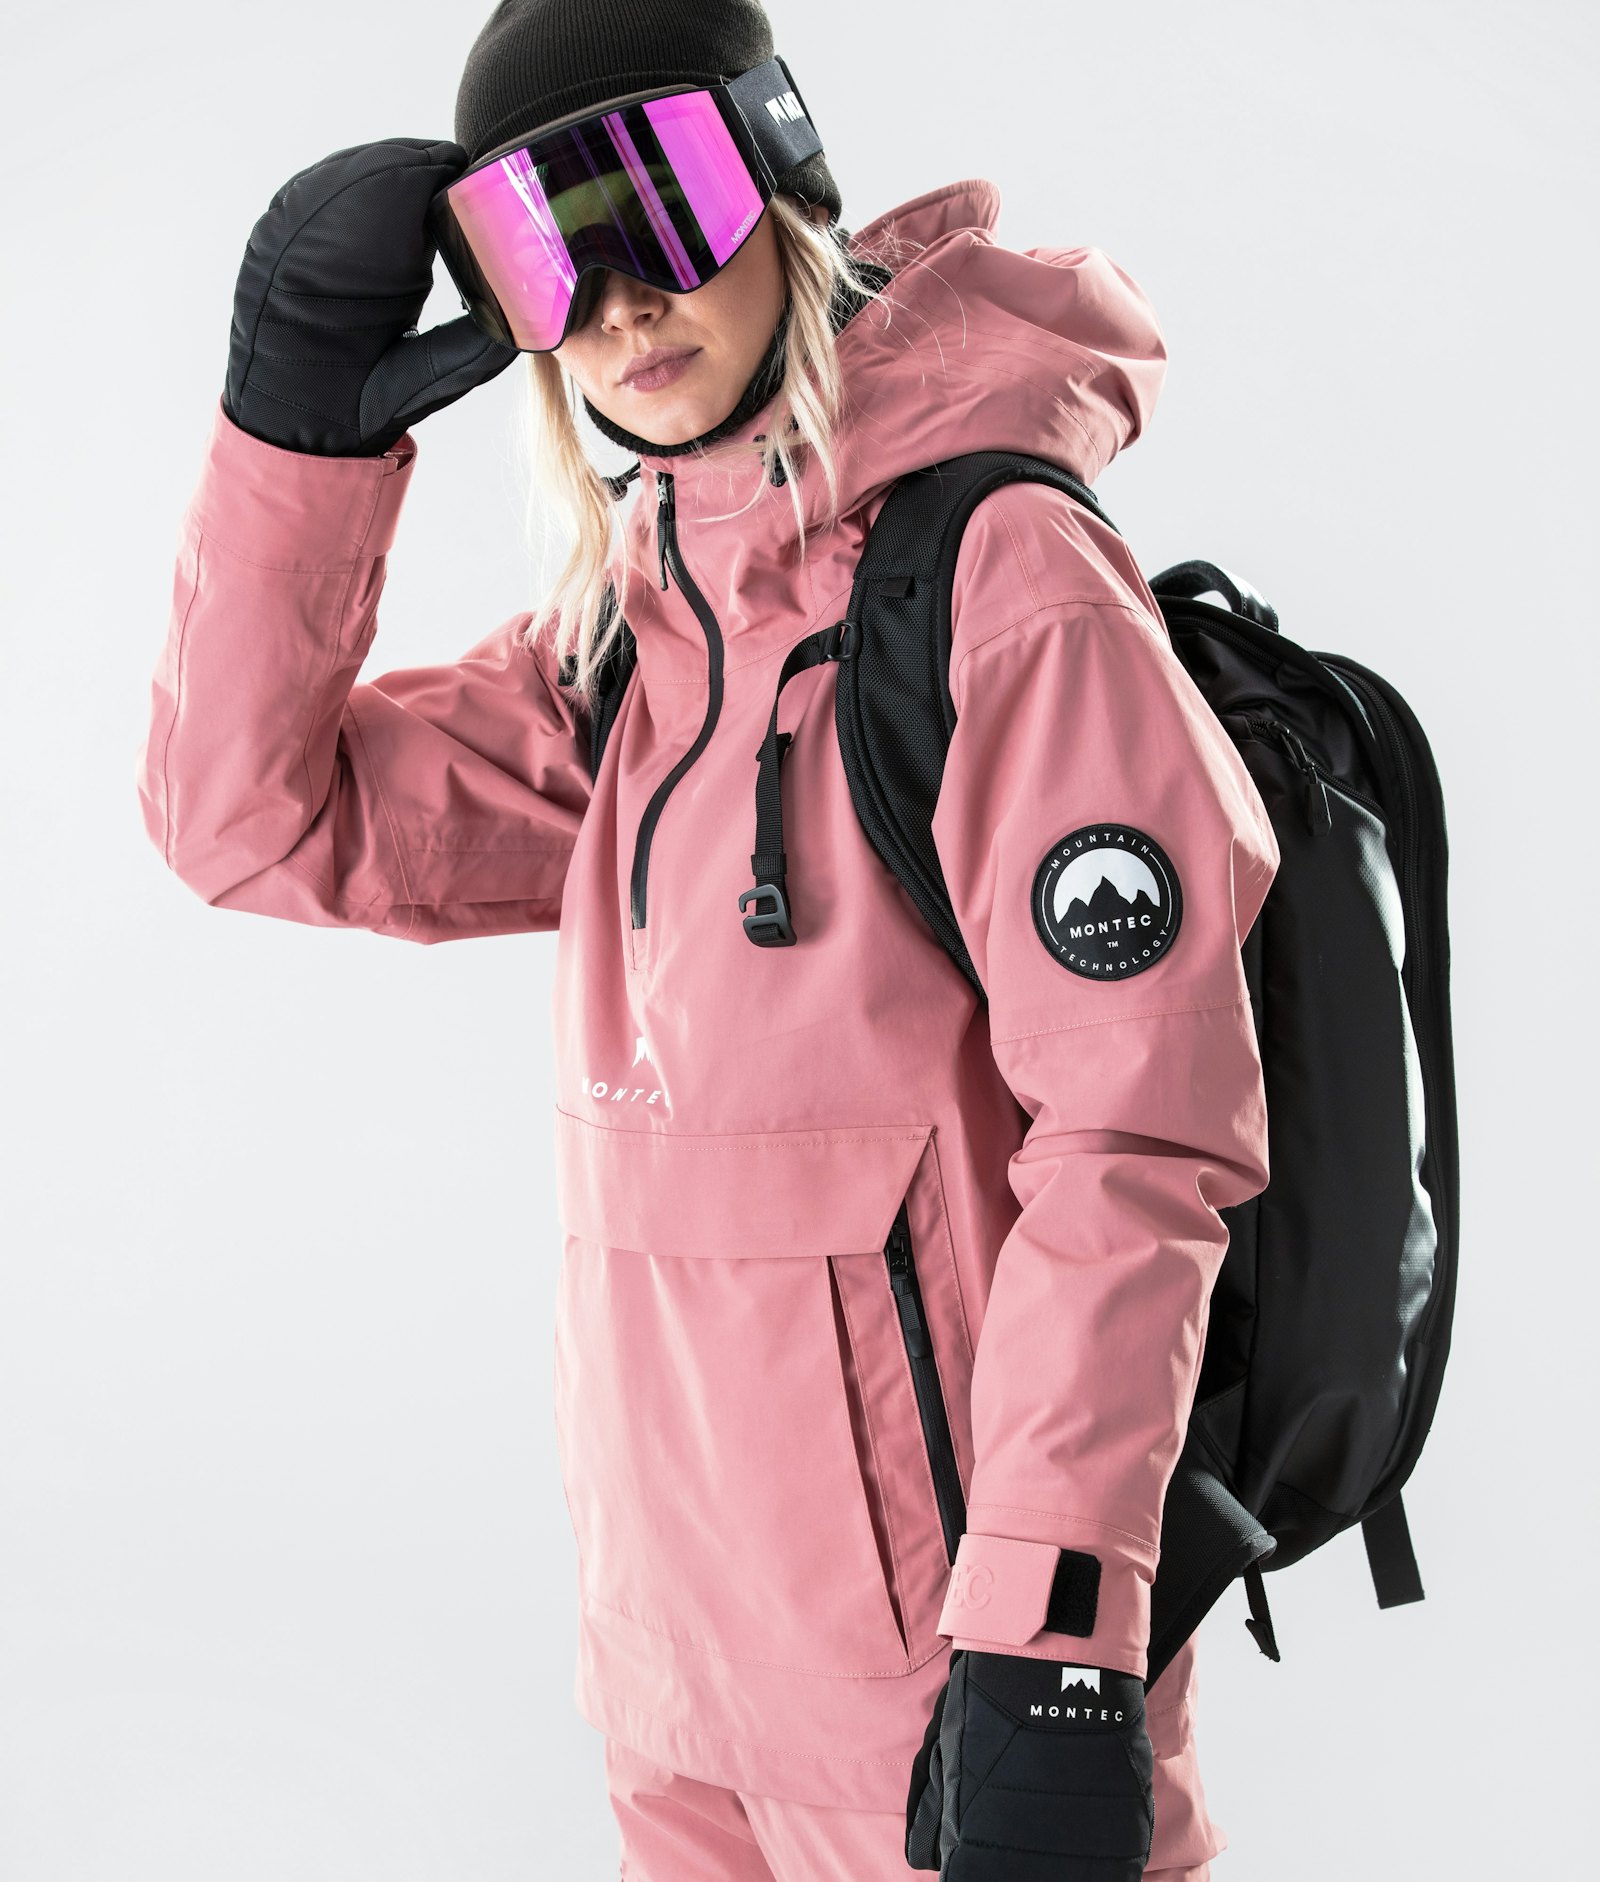 Montec Typhoon W 2020 Giacca Sci Donna Pink